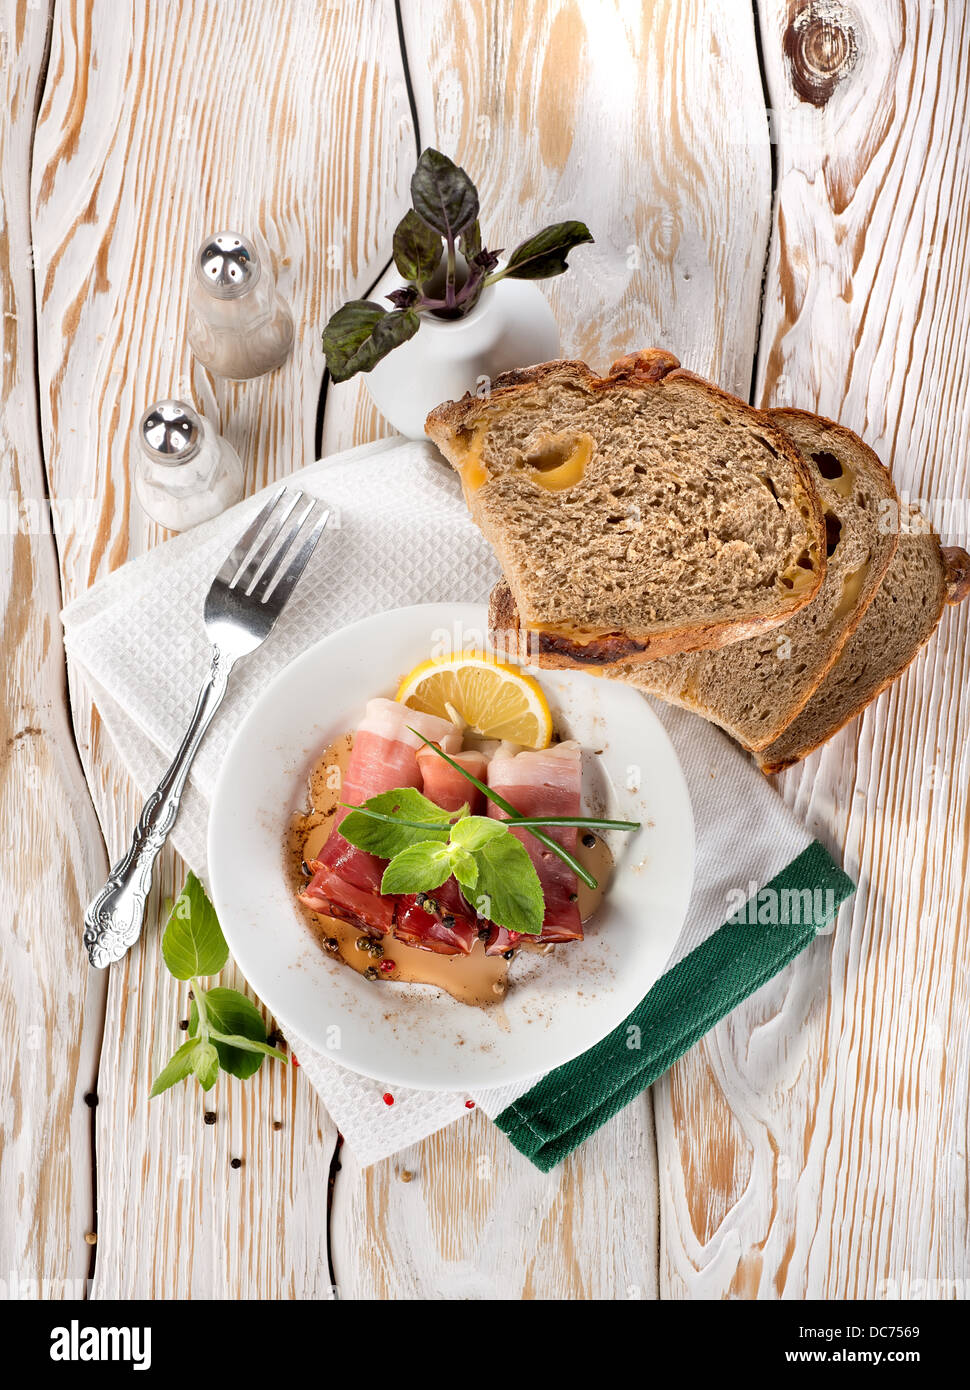 Bacon and bread on a white wooden table Stock Photo